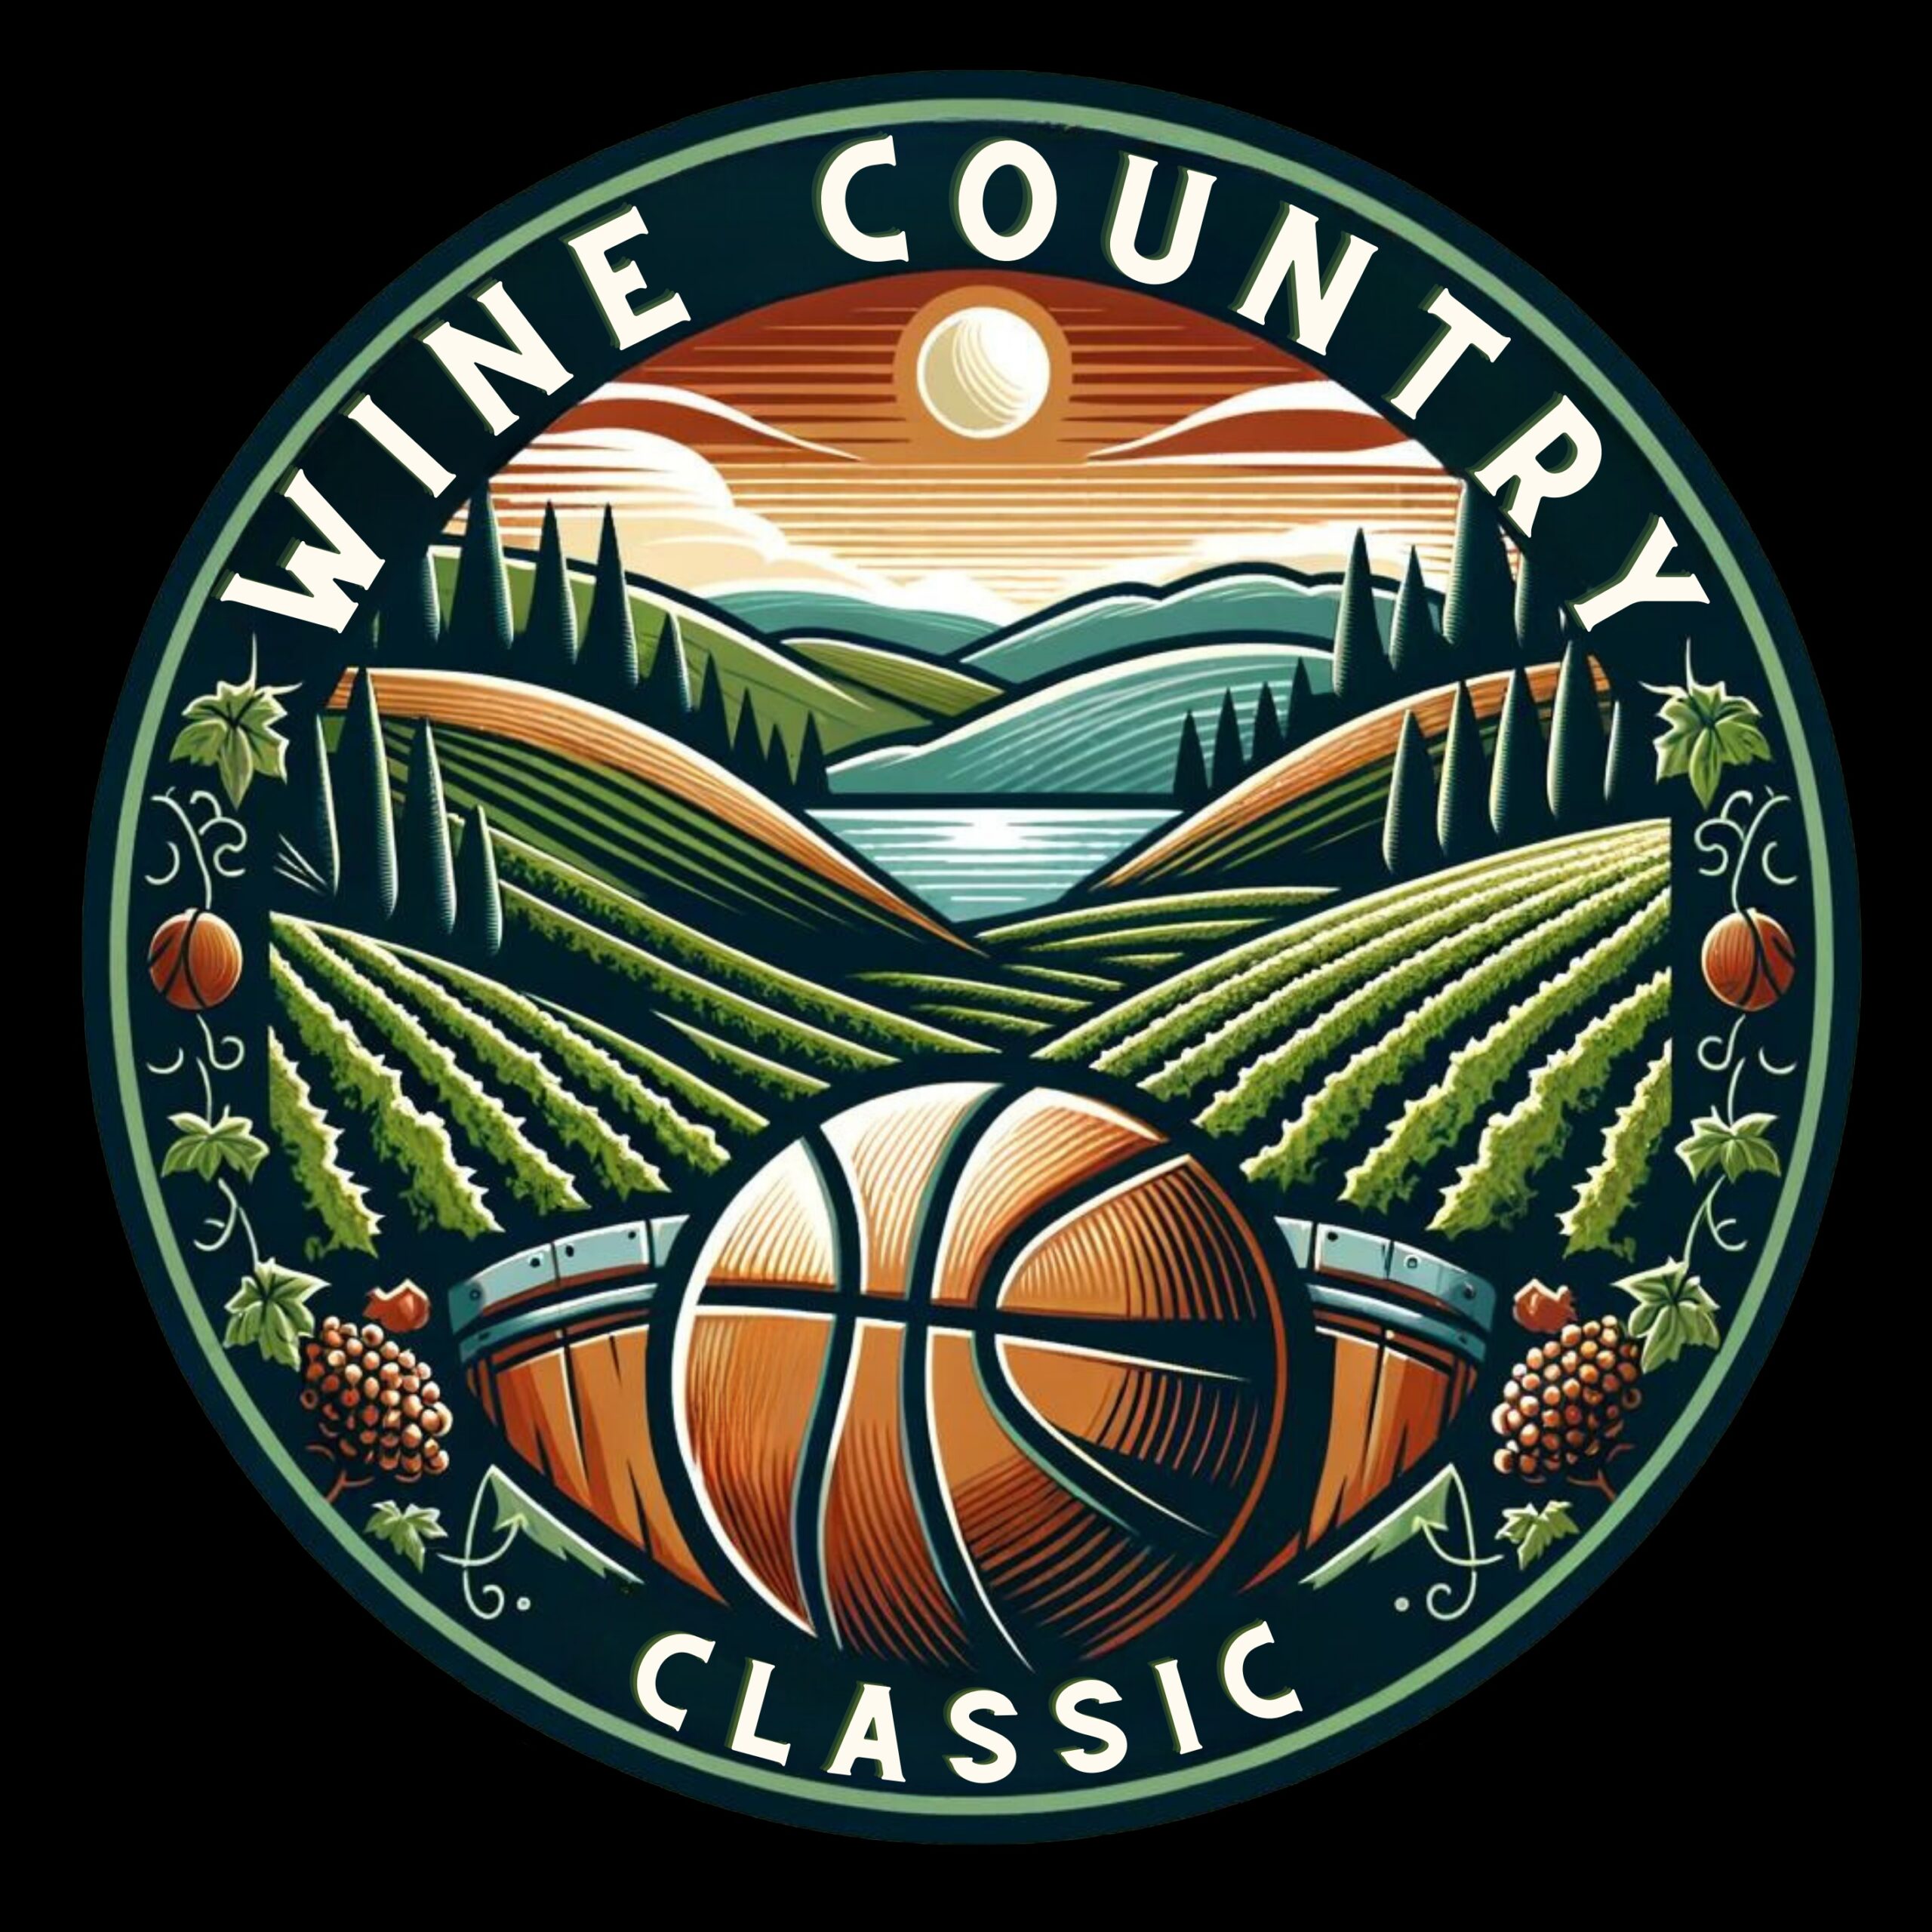 WINE COUNTRY CLASSIC - 2